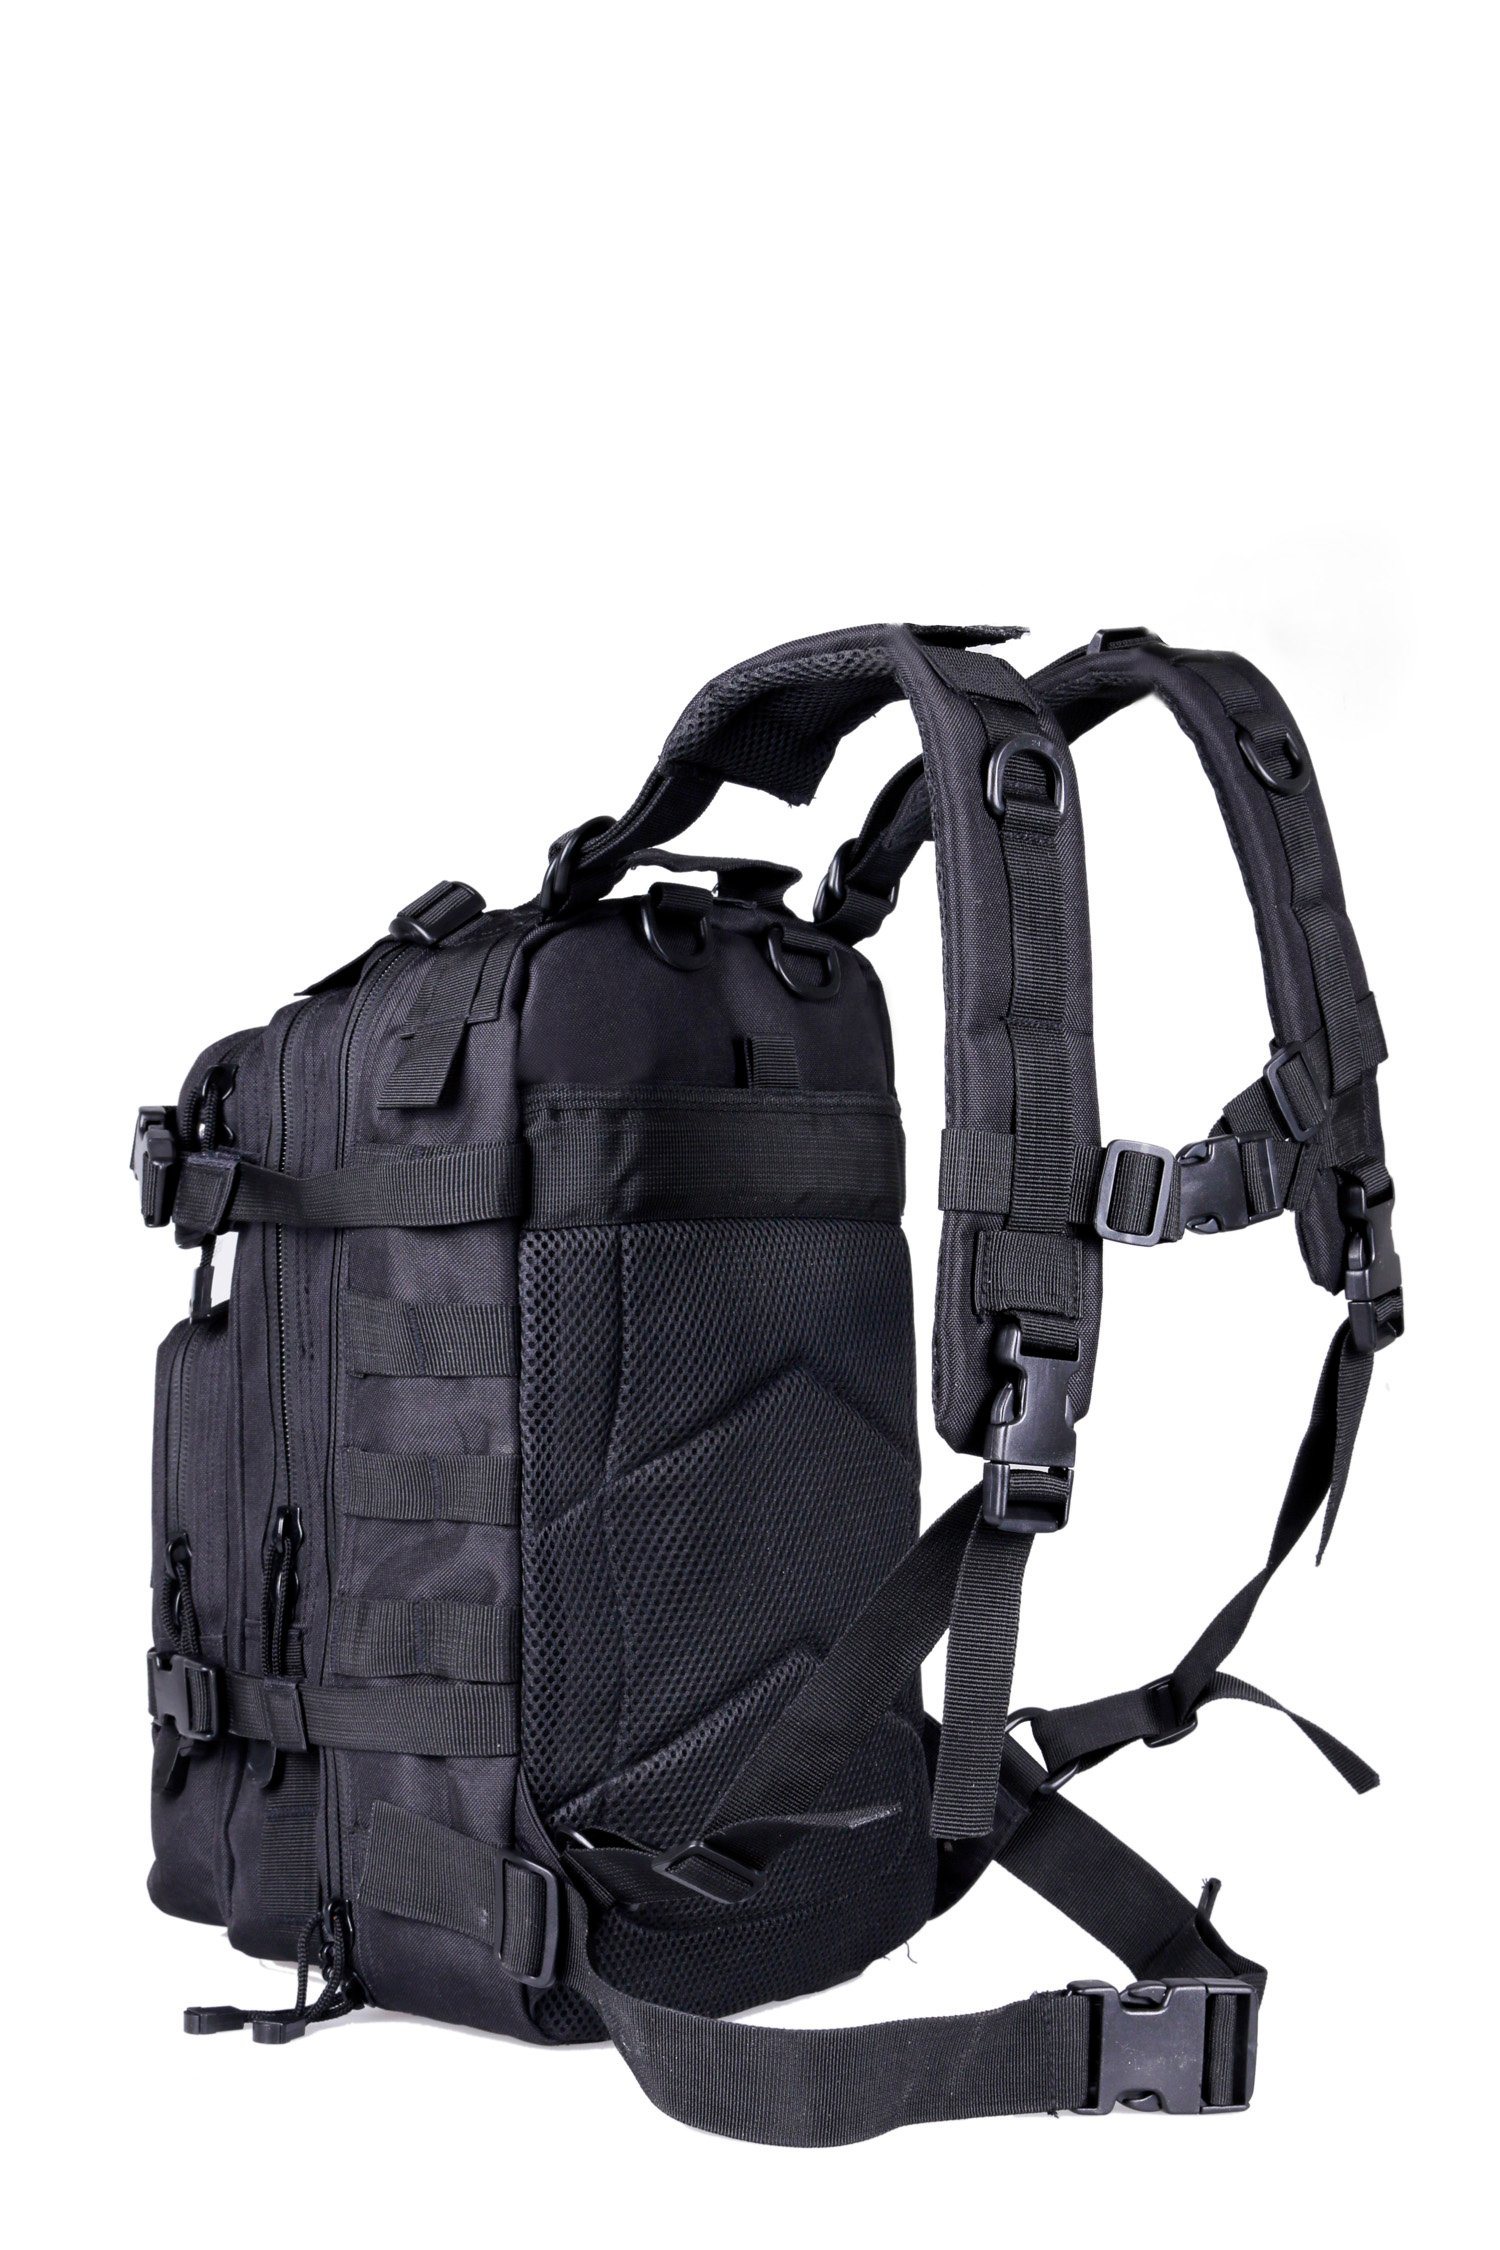 Large Capacity Waterproof Military Backpack Tactical Backpack for Army